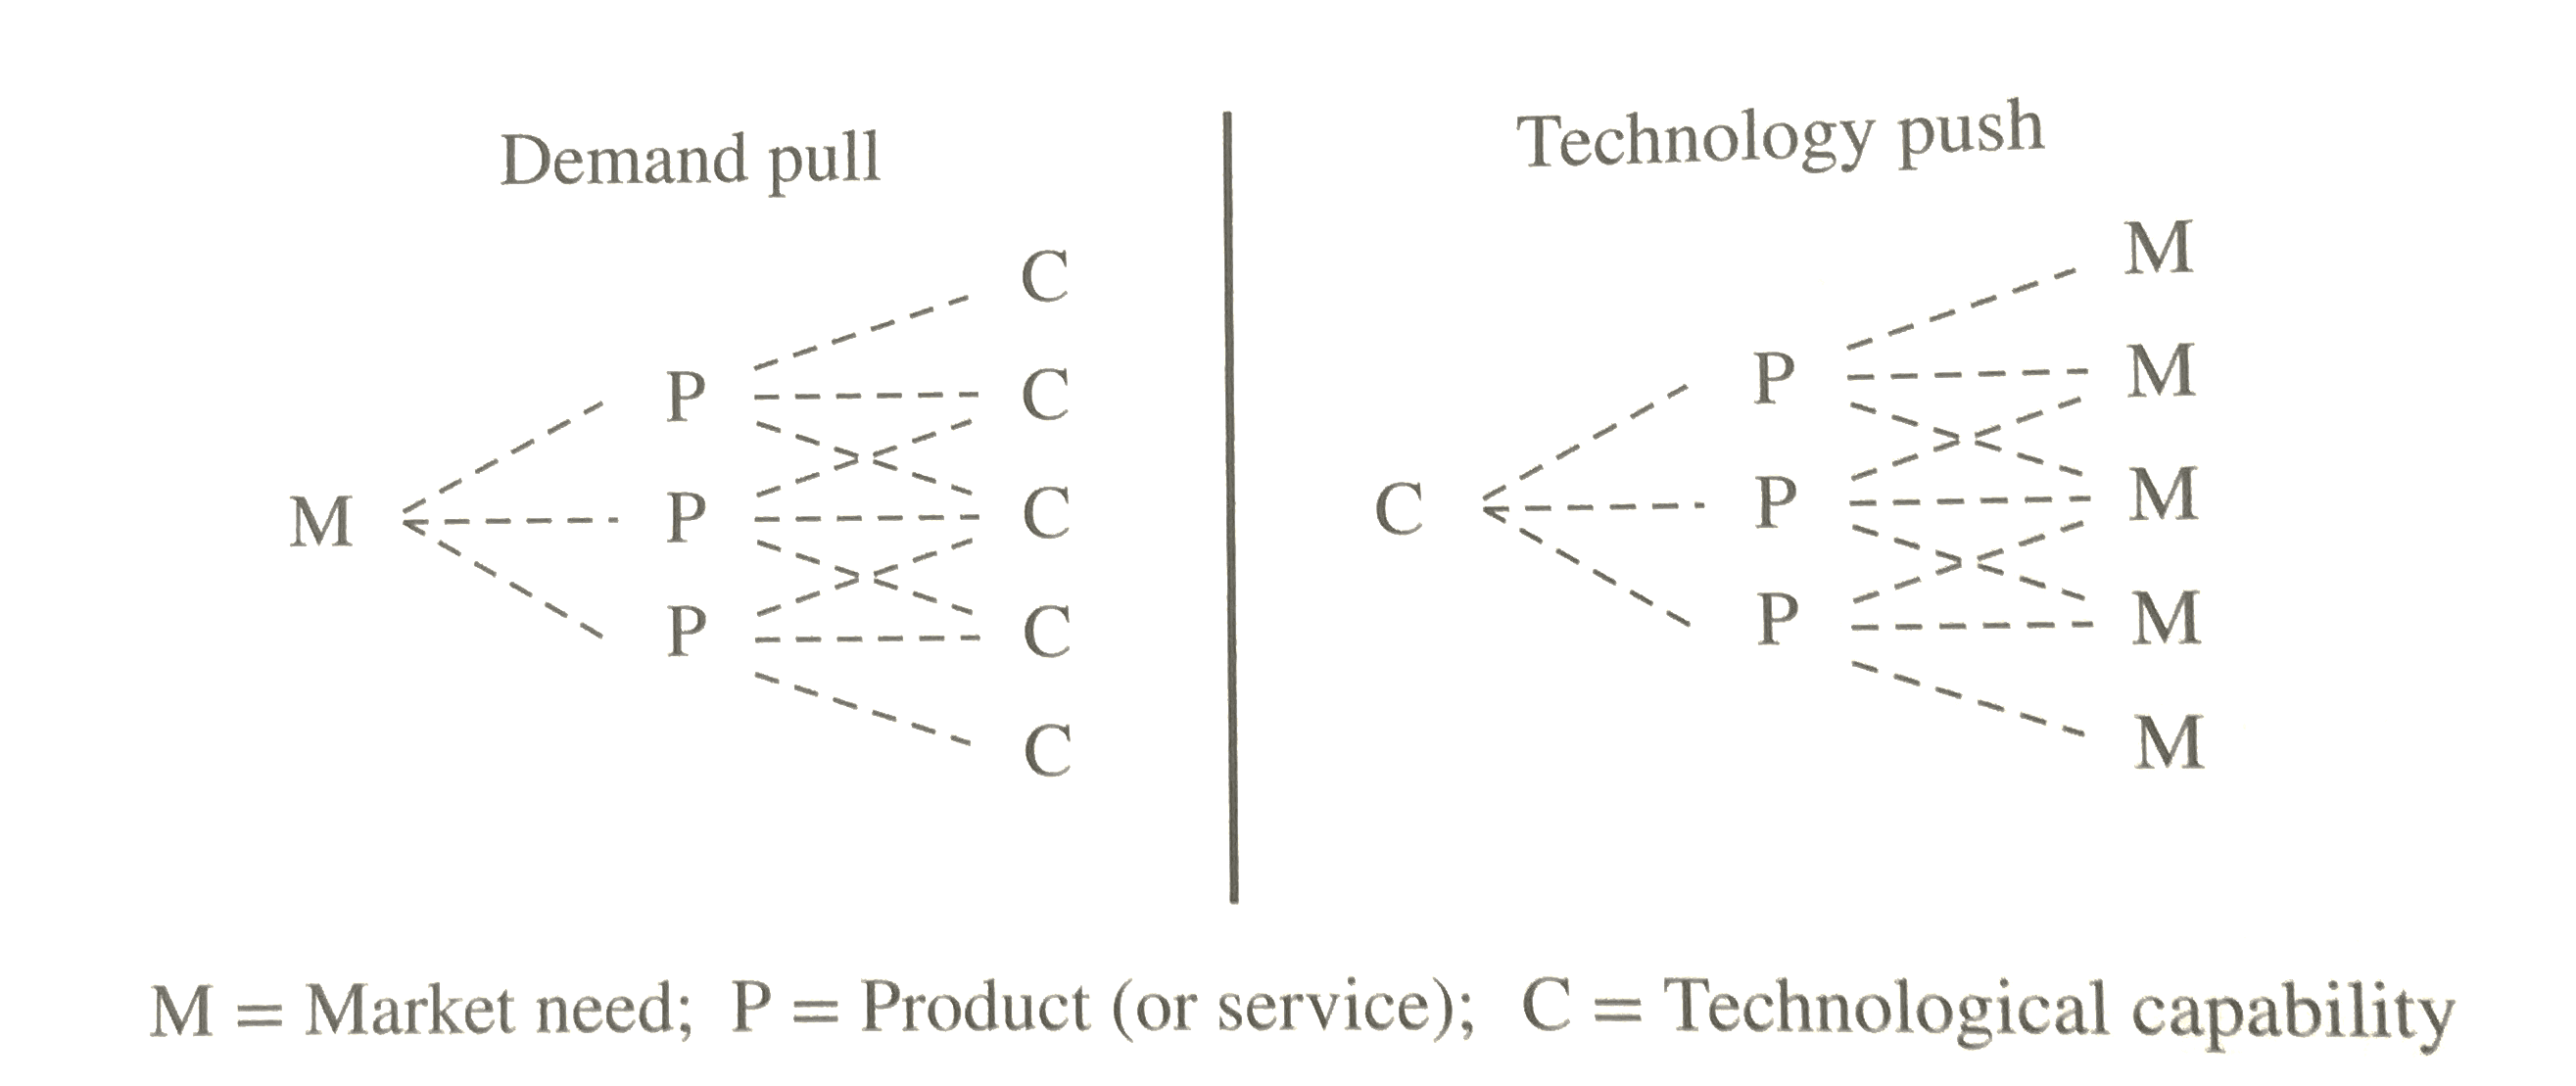 Demand pull and Technology push